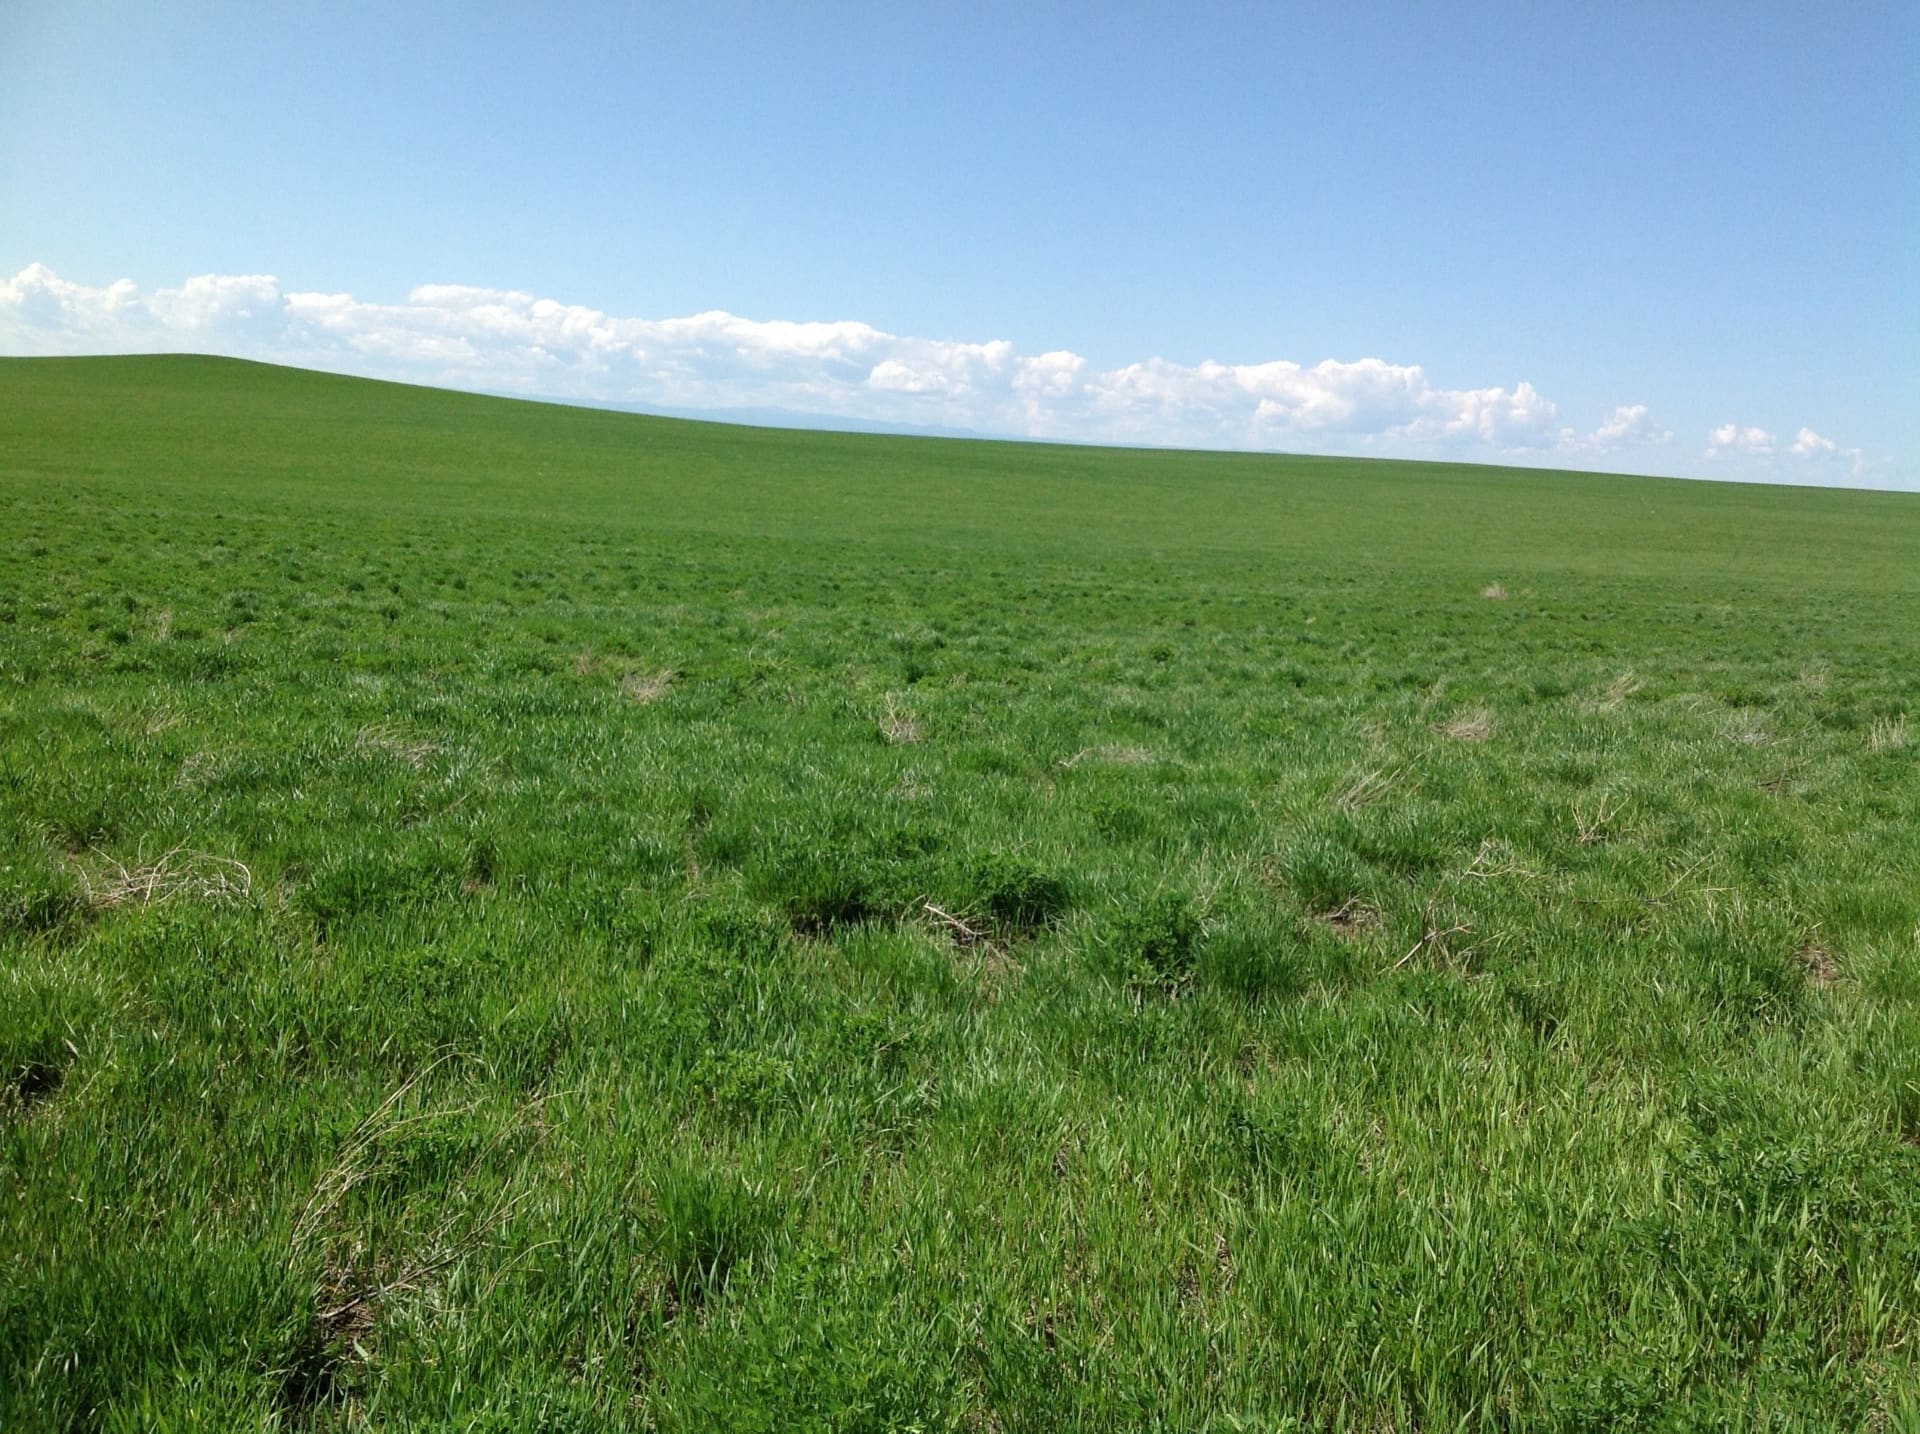 ranches property for sale south dakota northern plains grassland and cattle ranch